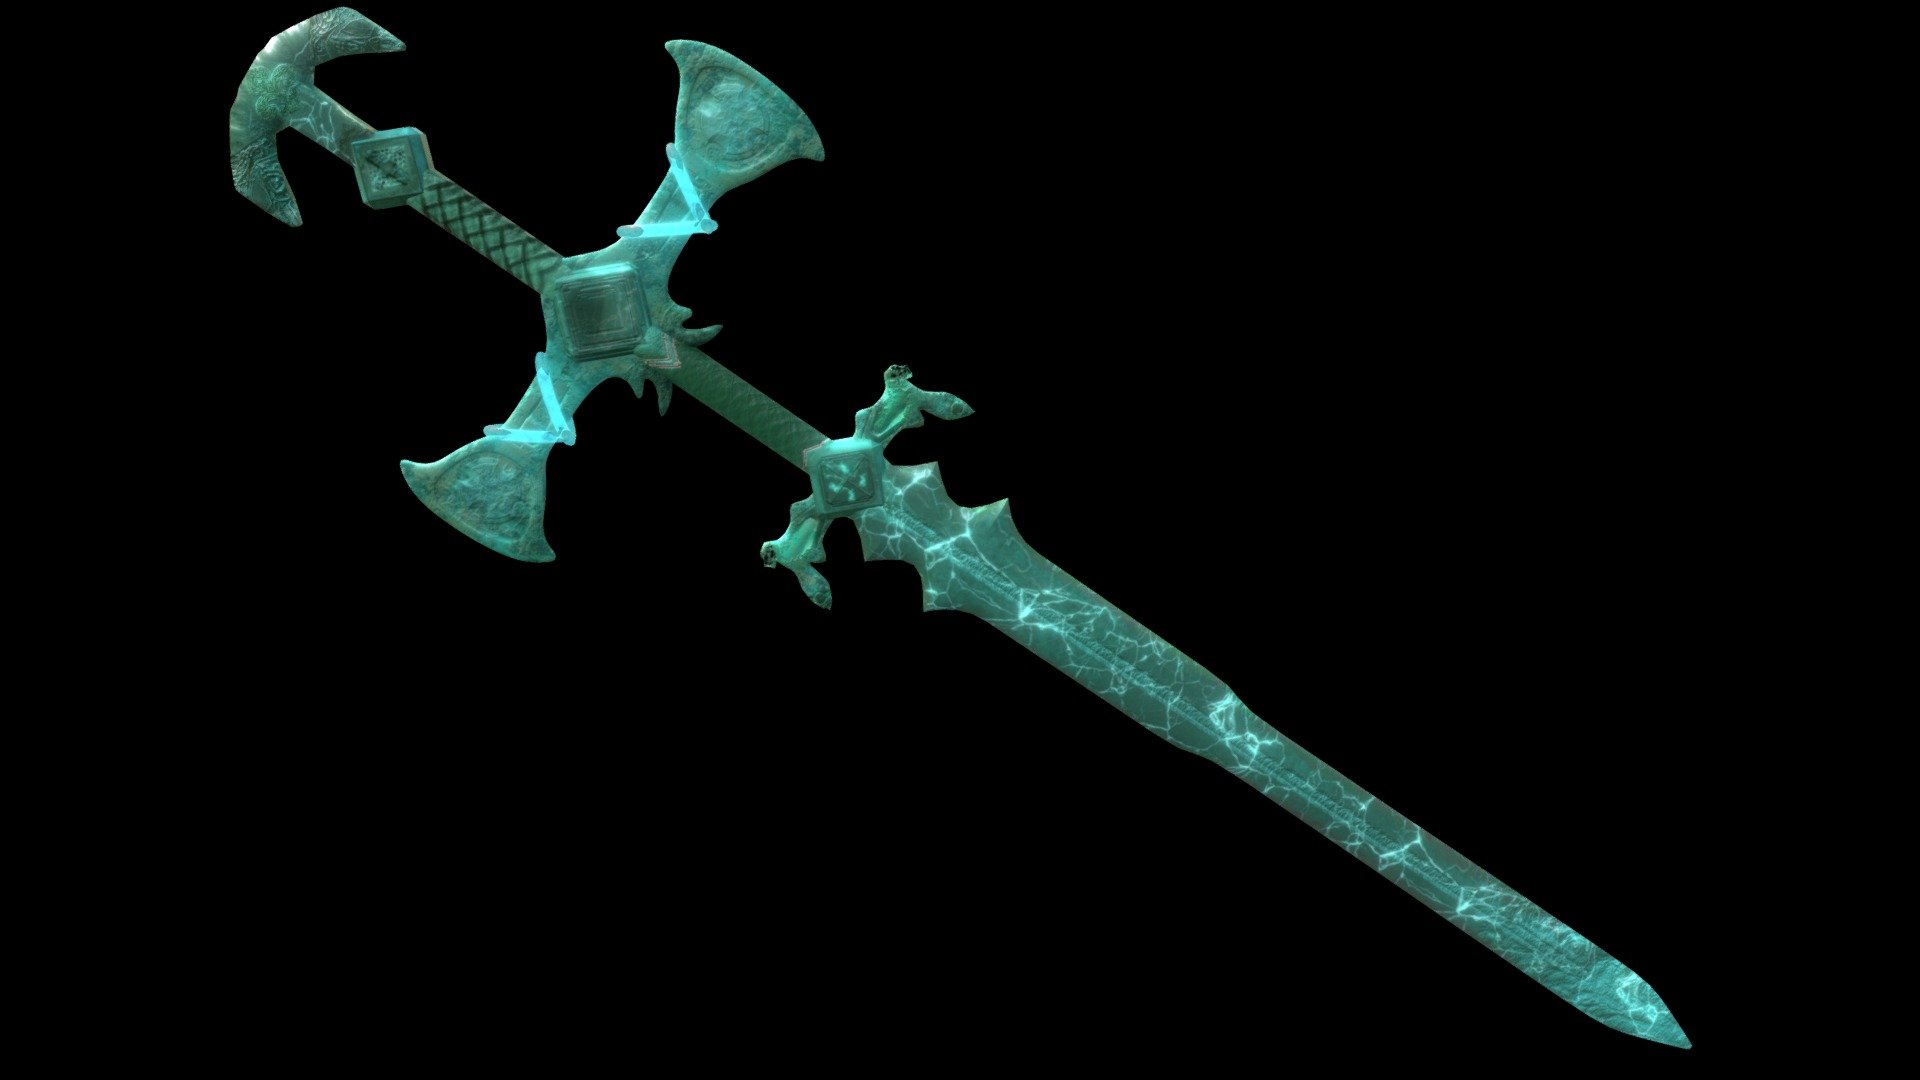 BLADE OF THE RUINED KING IS THE ULTIMATE TANK KILLER ITEM